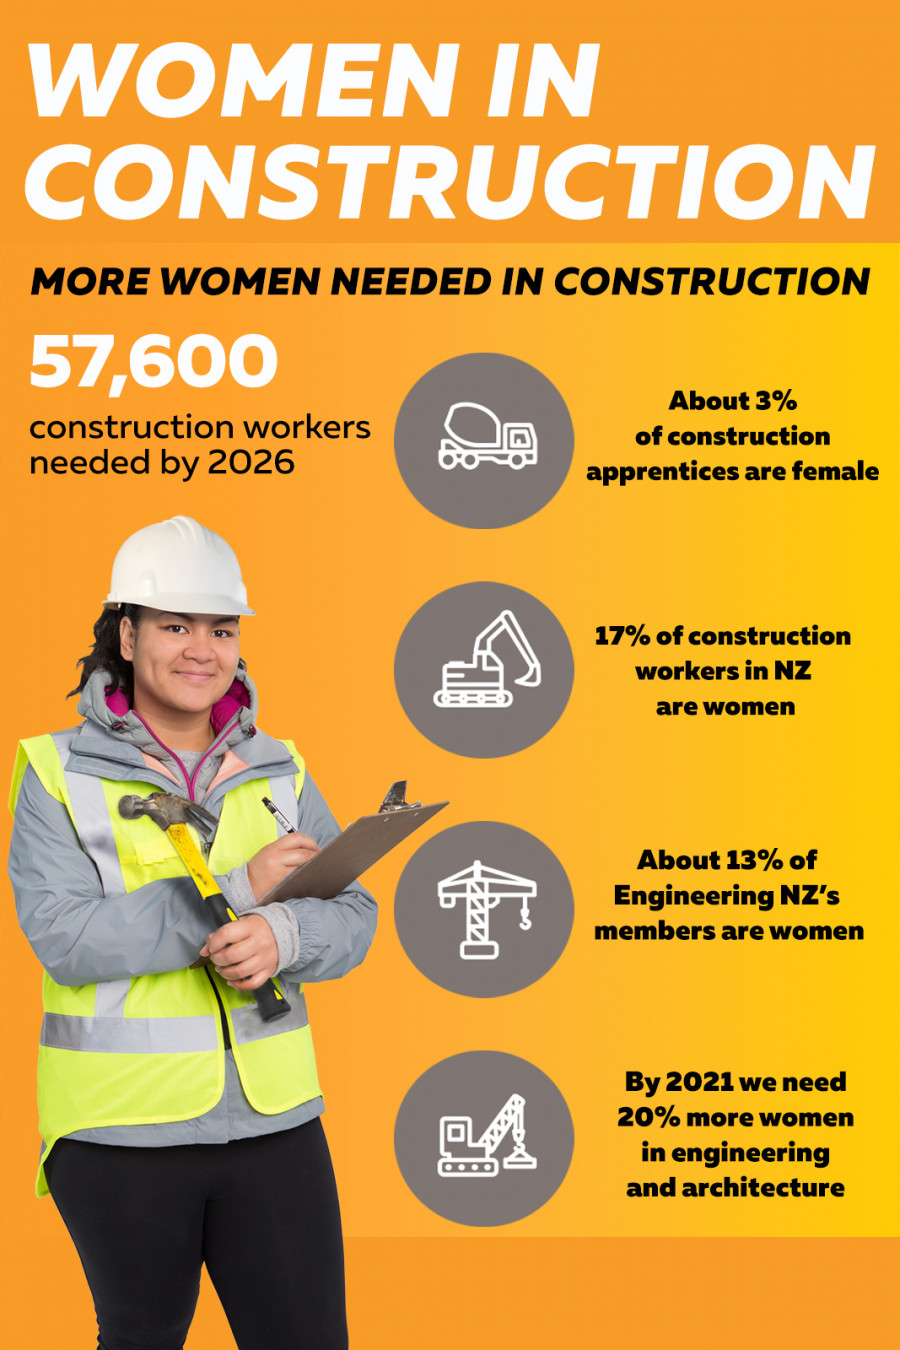 Infographic: Women in construction – more women needed in construction. 57,600 construction workers needed by 2026; About 3% of construction apprentices are female; 17% of construction workers in NZ are women; About 13% of Engineering NZ’s members are women; By 2021 we need 20% more women in engineering and architecture.